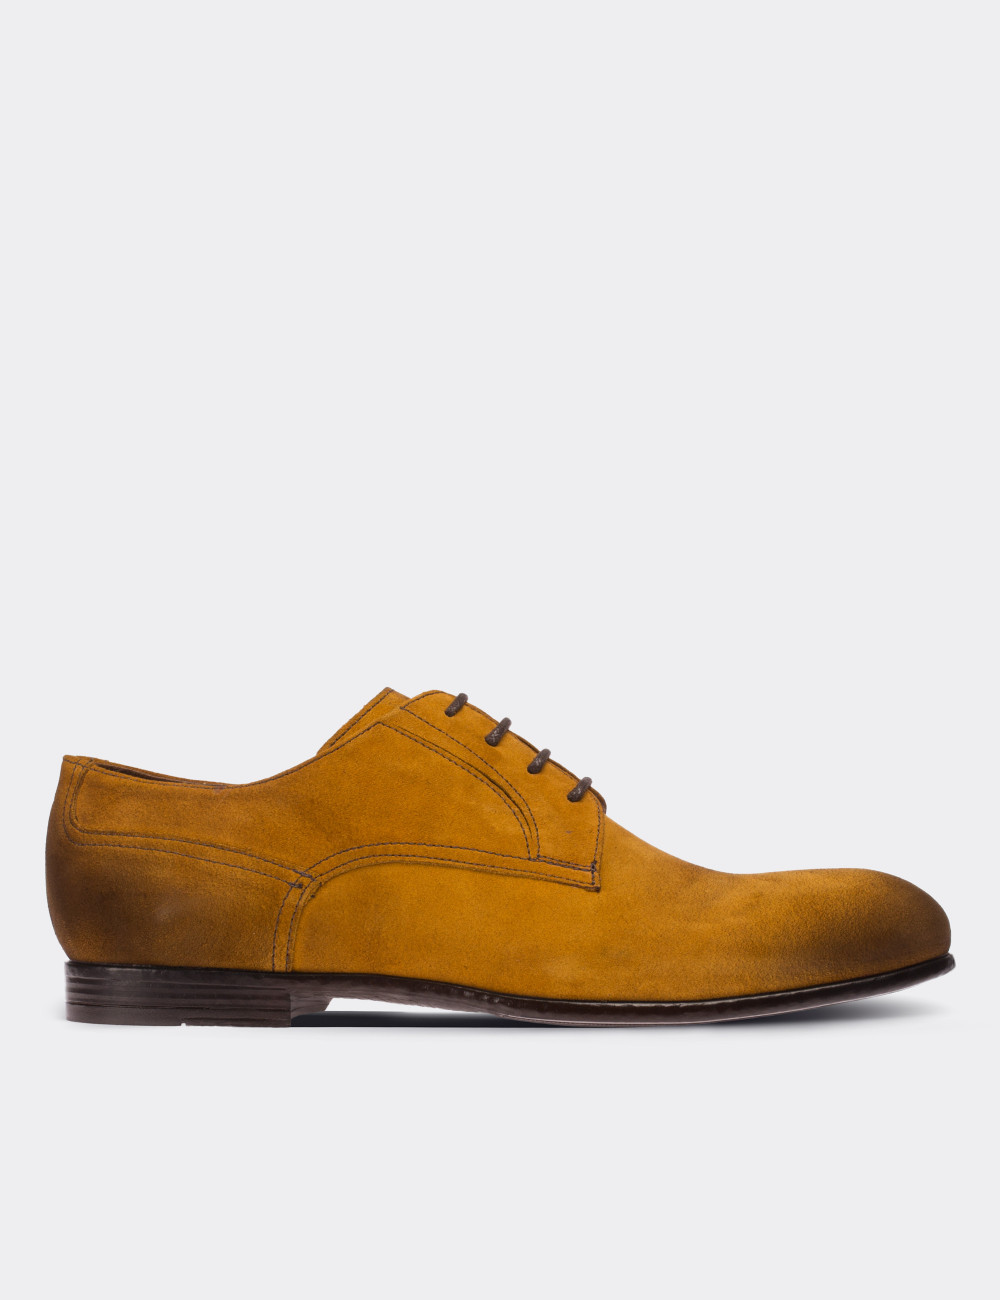 yellow suede shoes